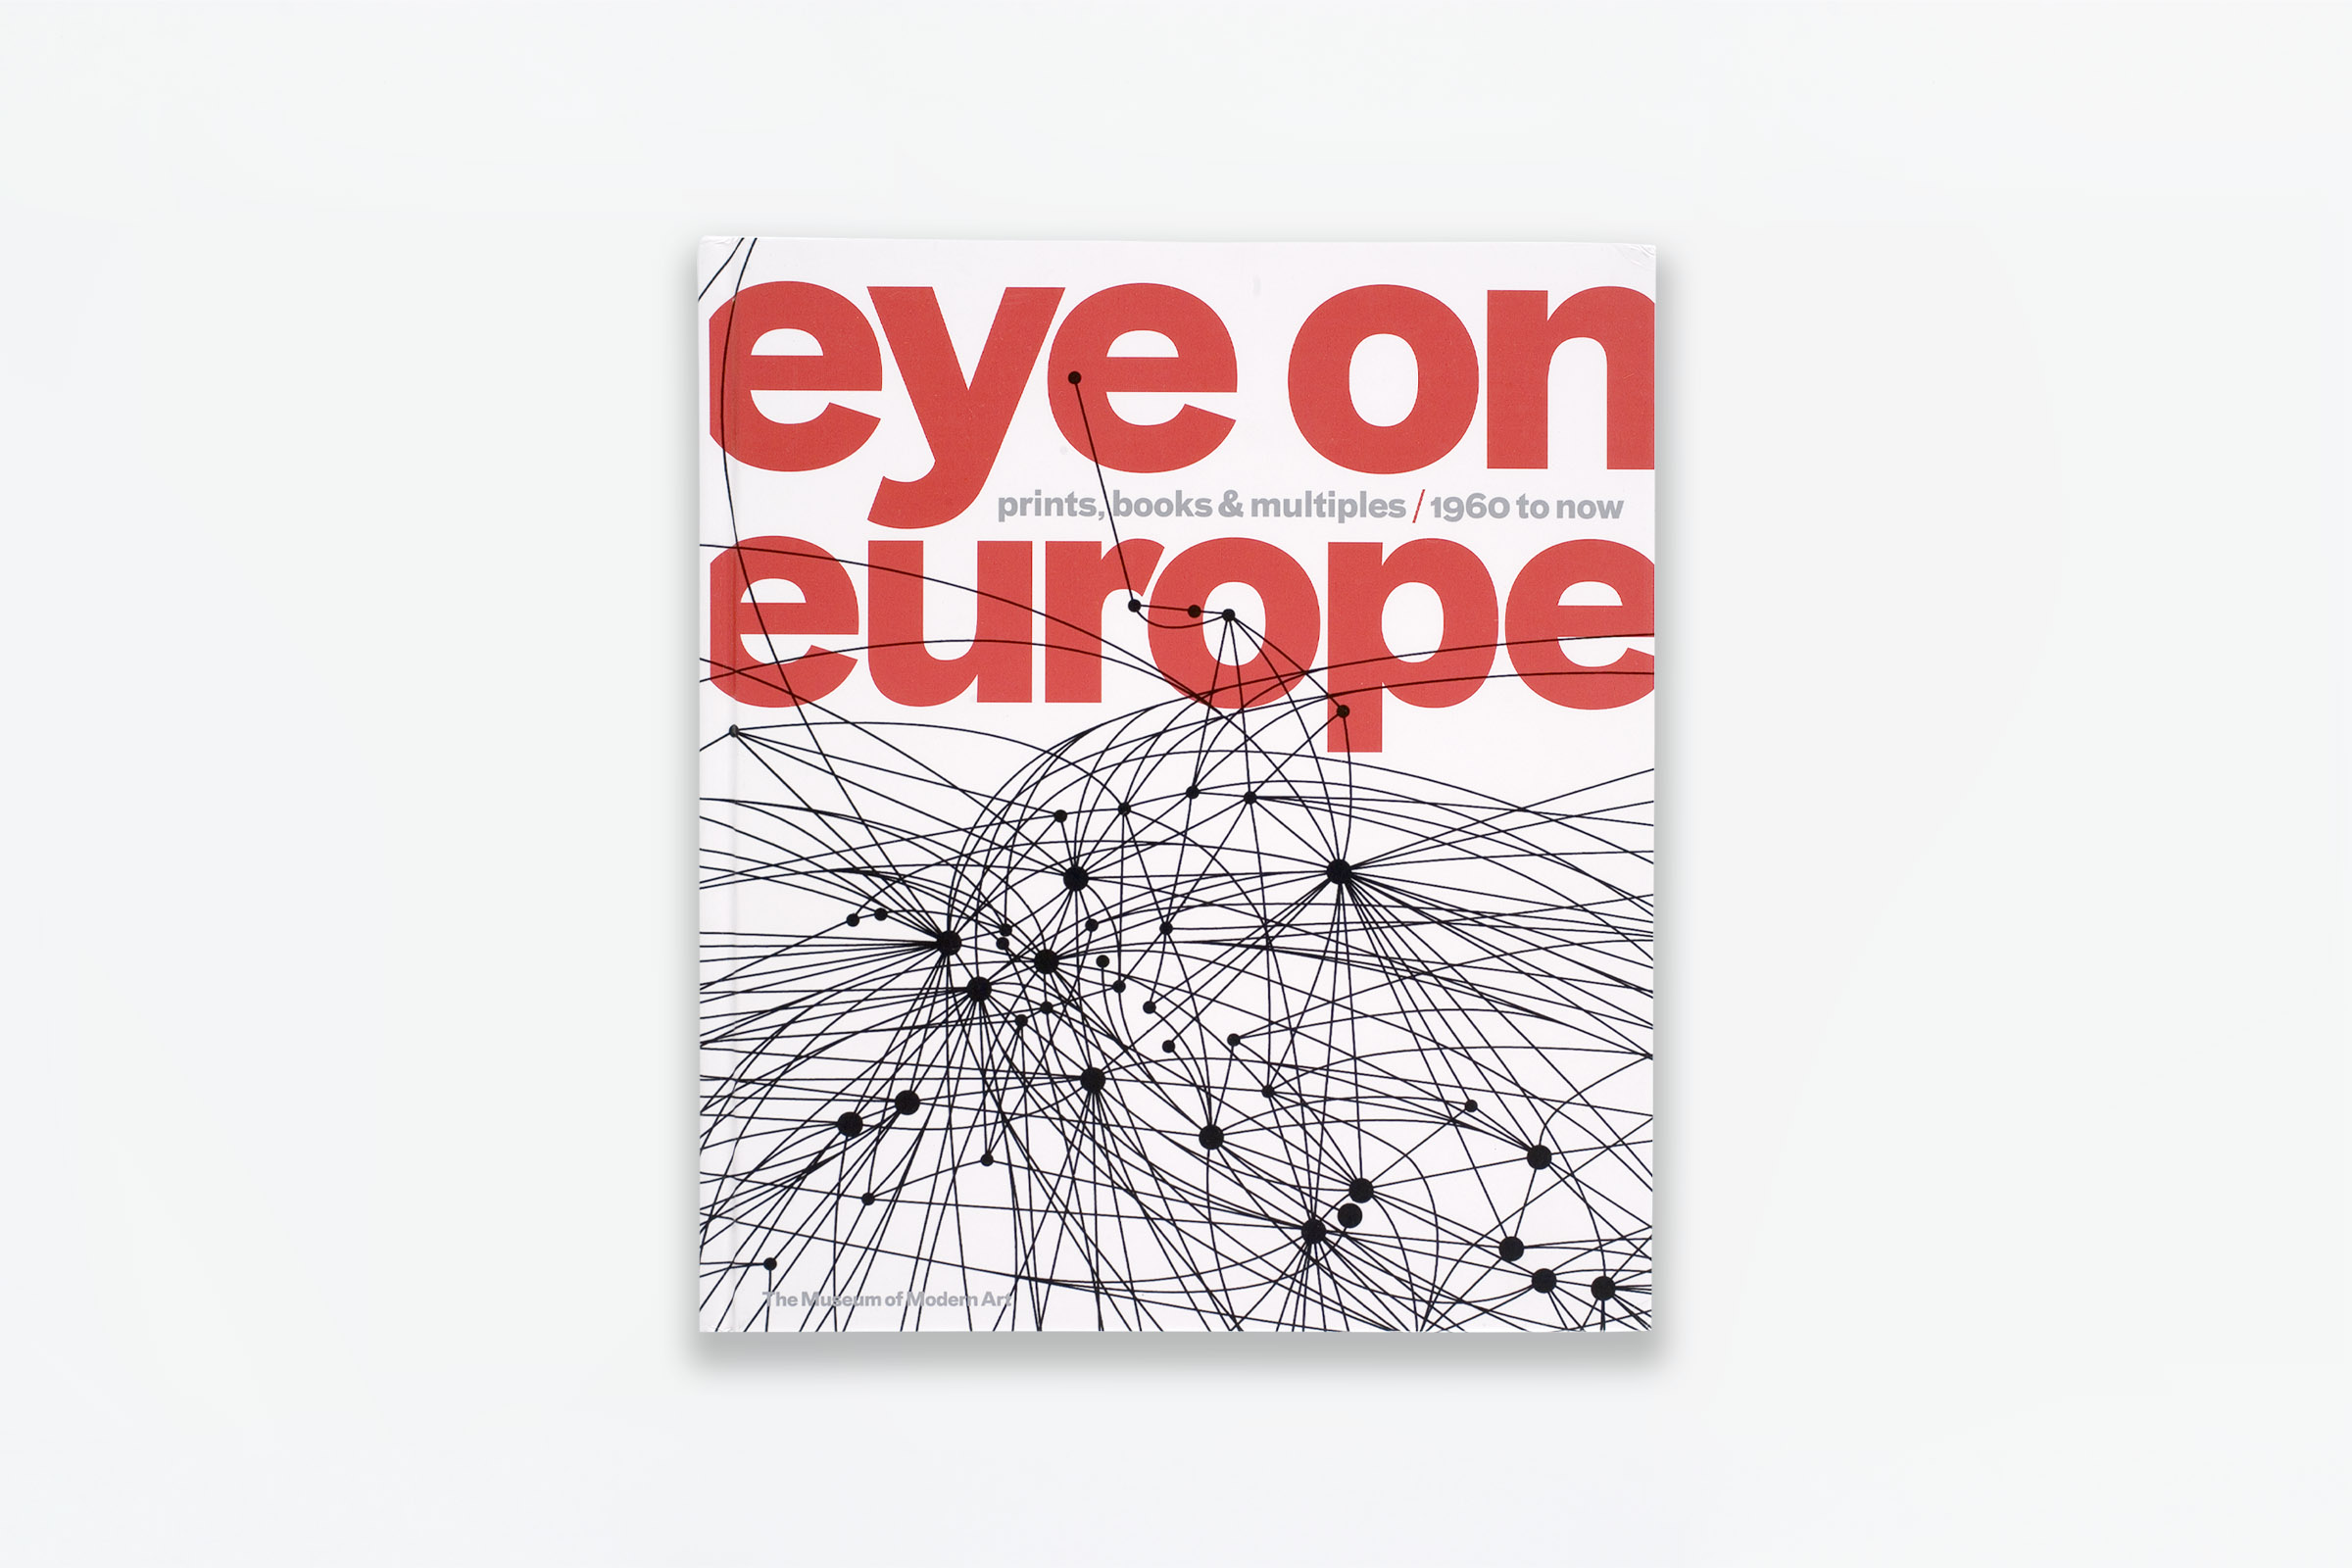 Eye on Europe: Prints, Books and Multiples